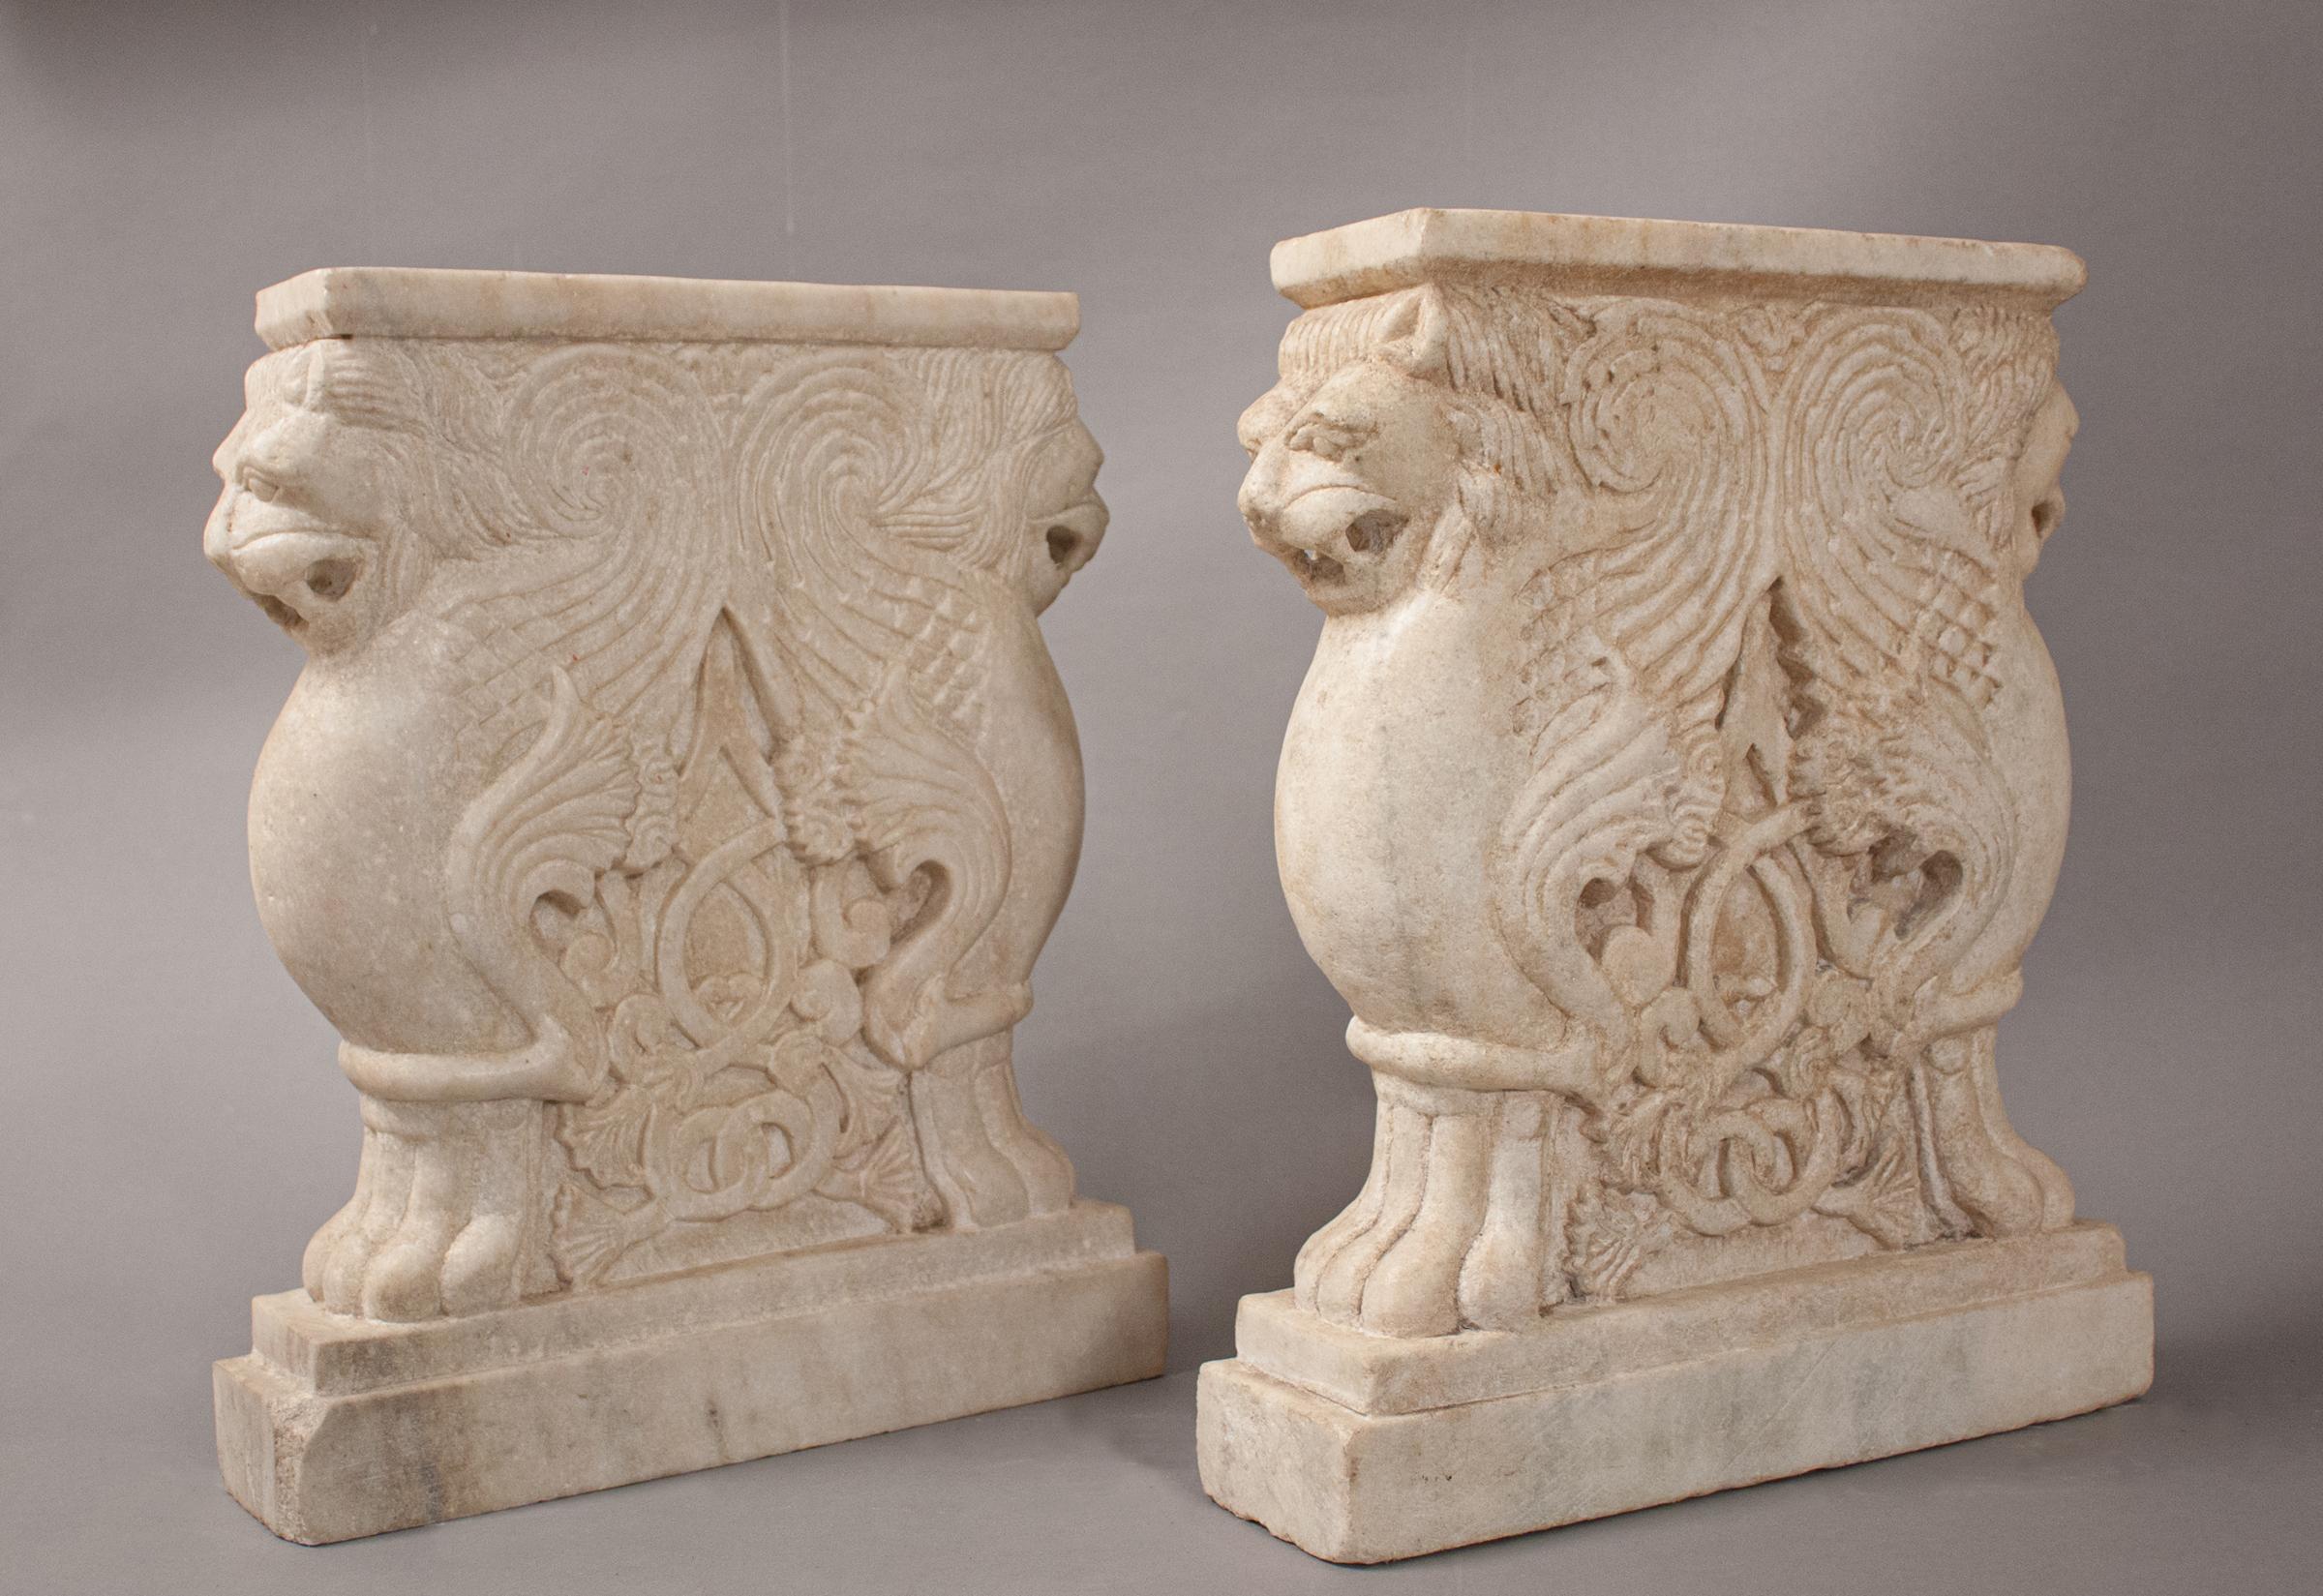 A beautiful pair of hand carved white marble lion bench supports with attractive veining. These circa 1950 winged sentries feature a detailed, carved centerpiece relief. With a complementary slab of marble or stone on top, they will make a beautiful